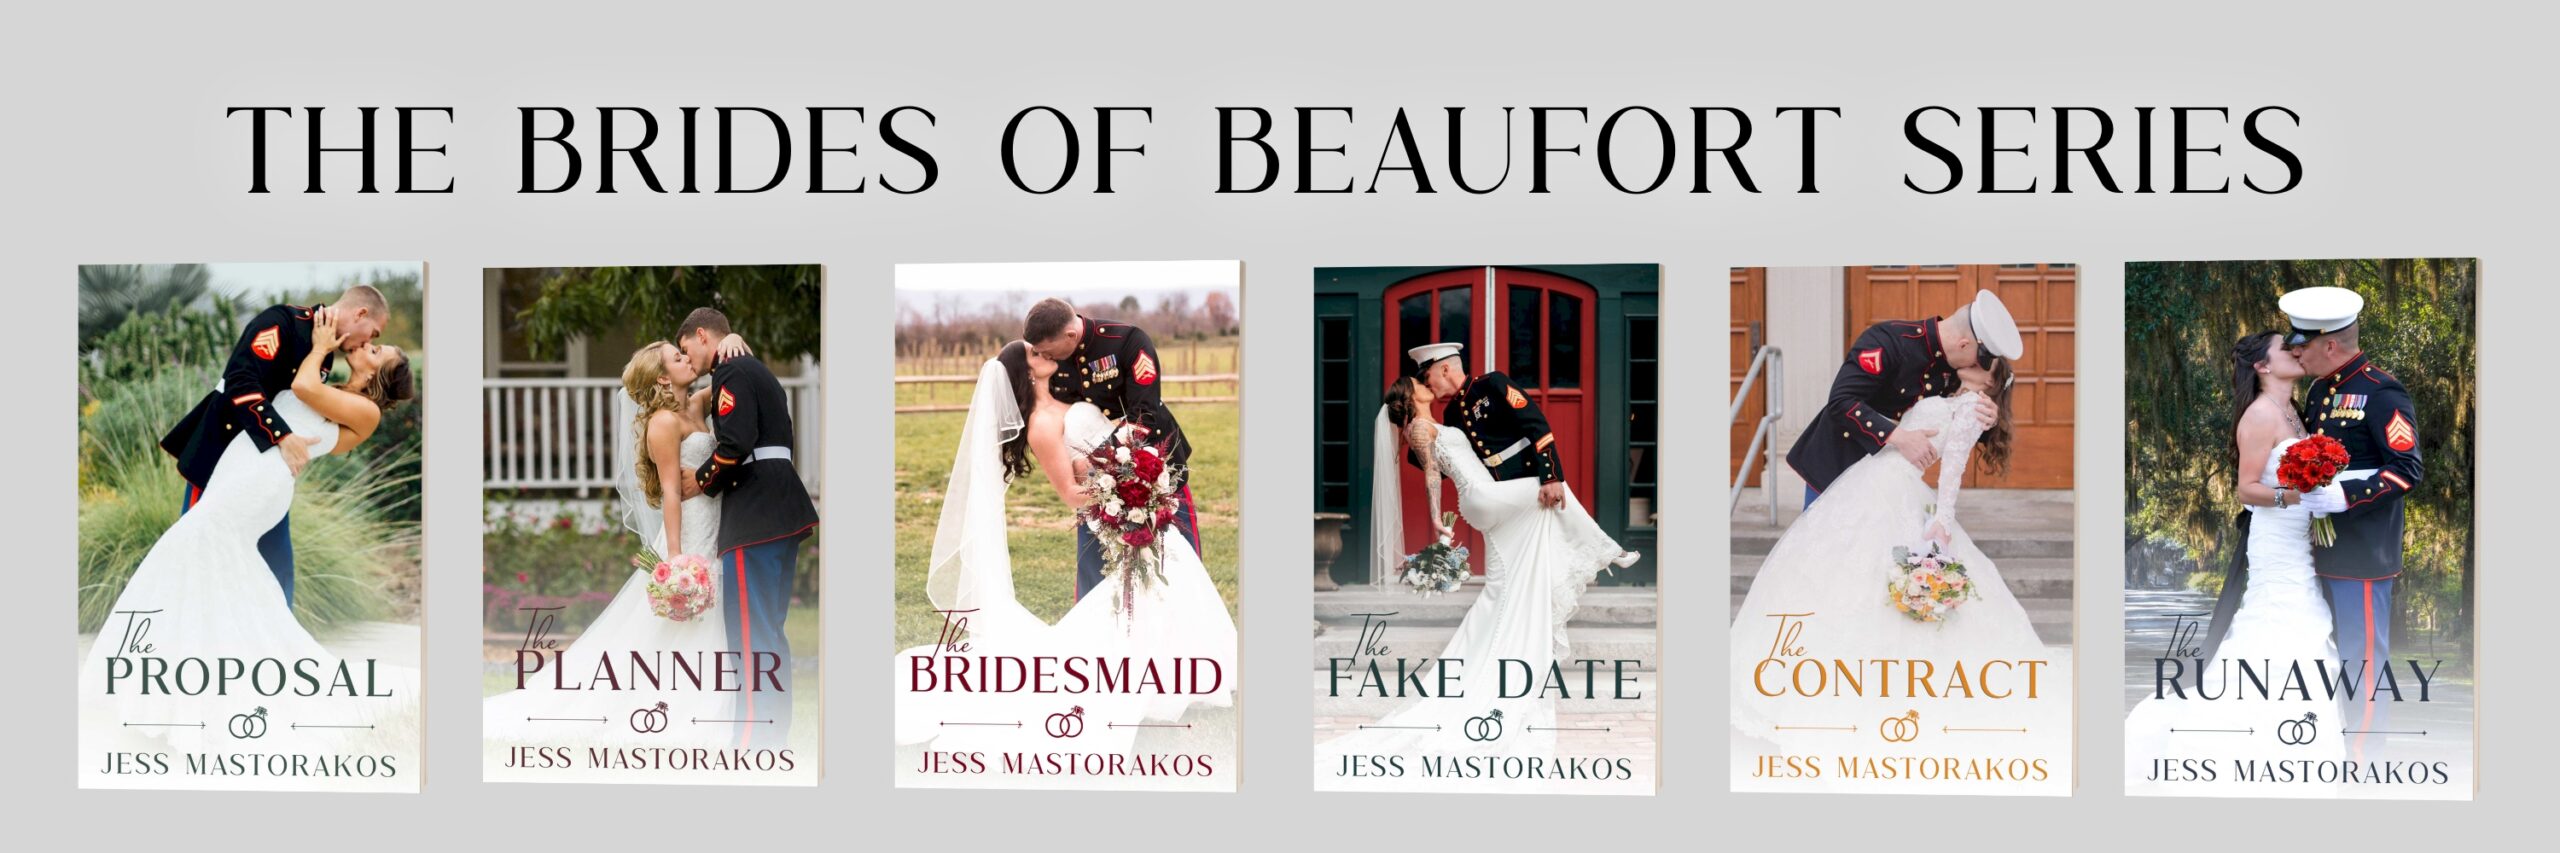 The Brides of Beaufort Series